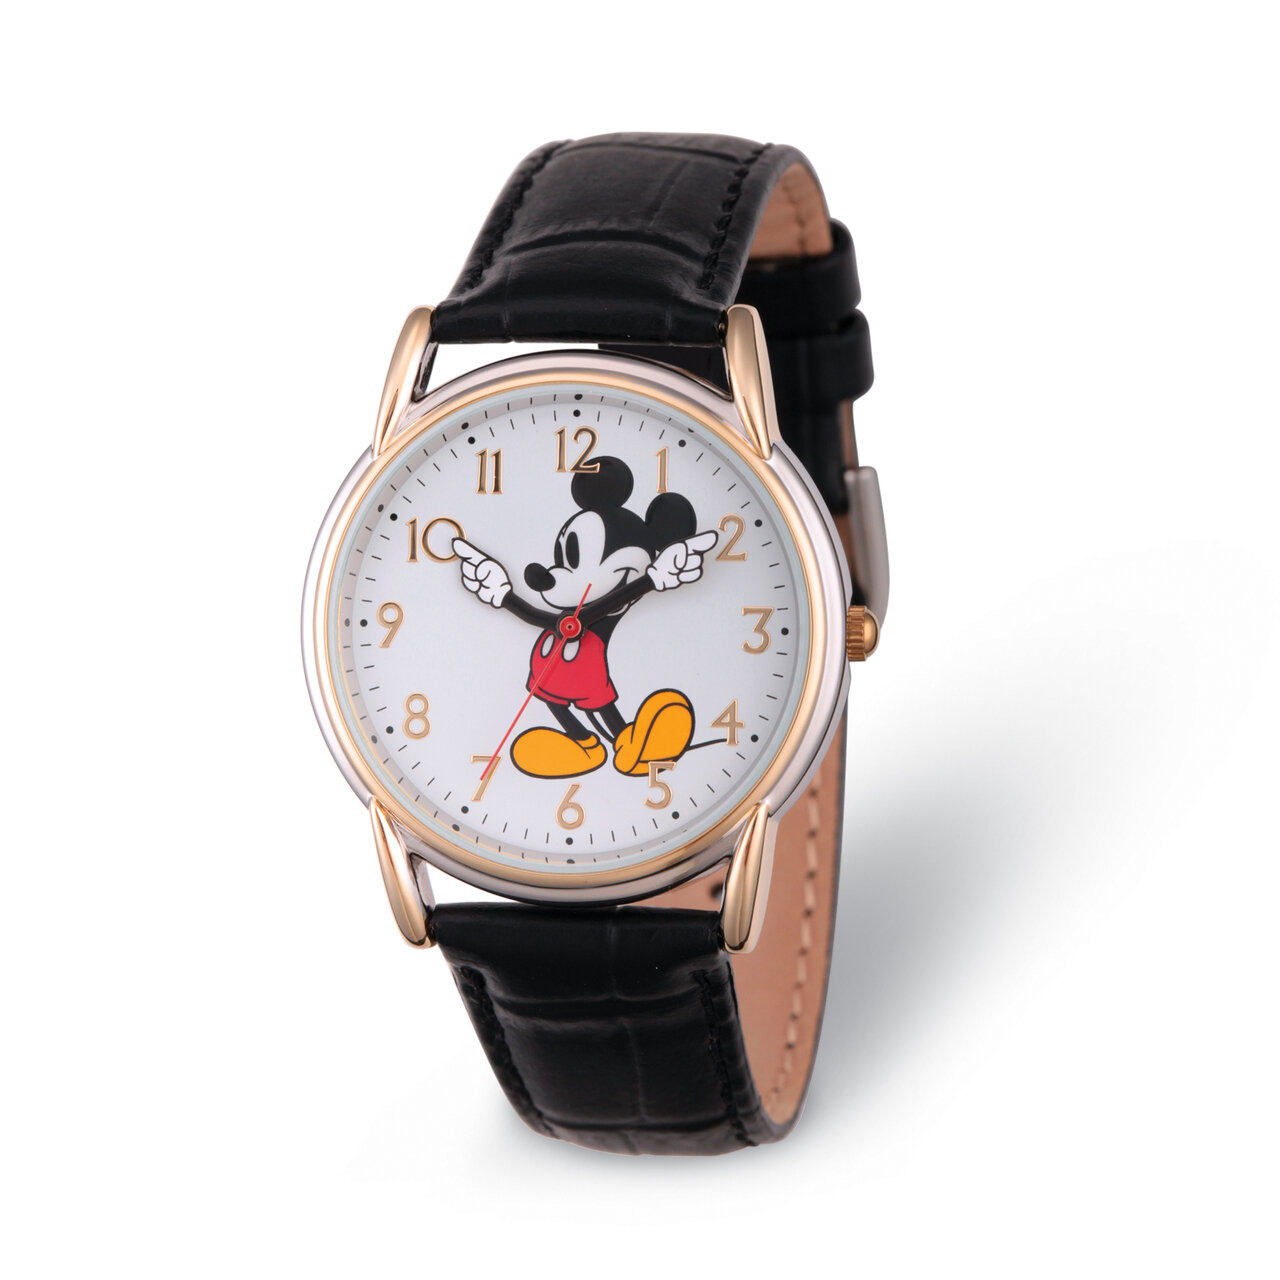 Disney Adult Size Black Strap Mickey Mouse with Moving Arms Watch XWA5772